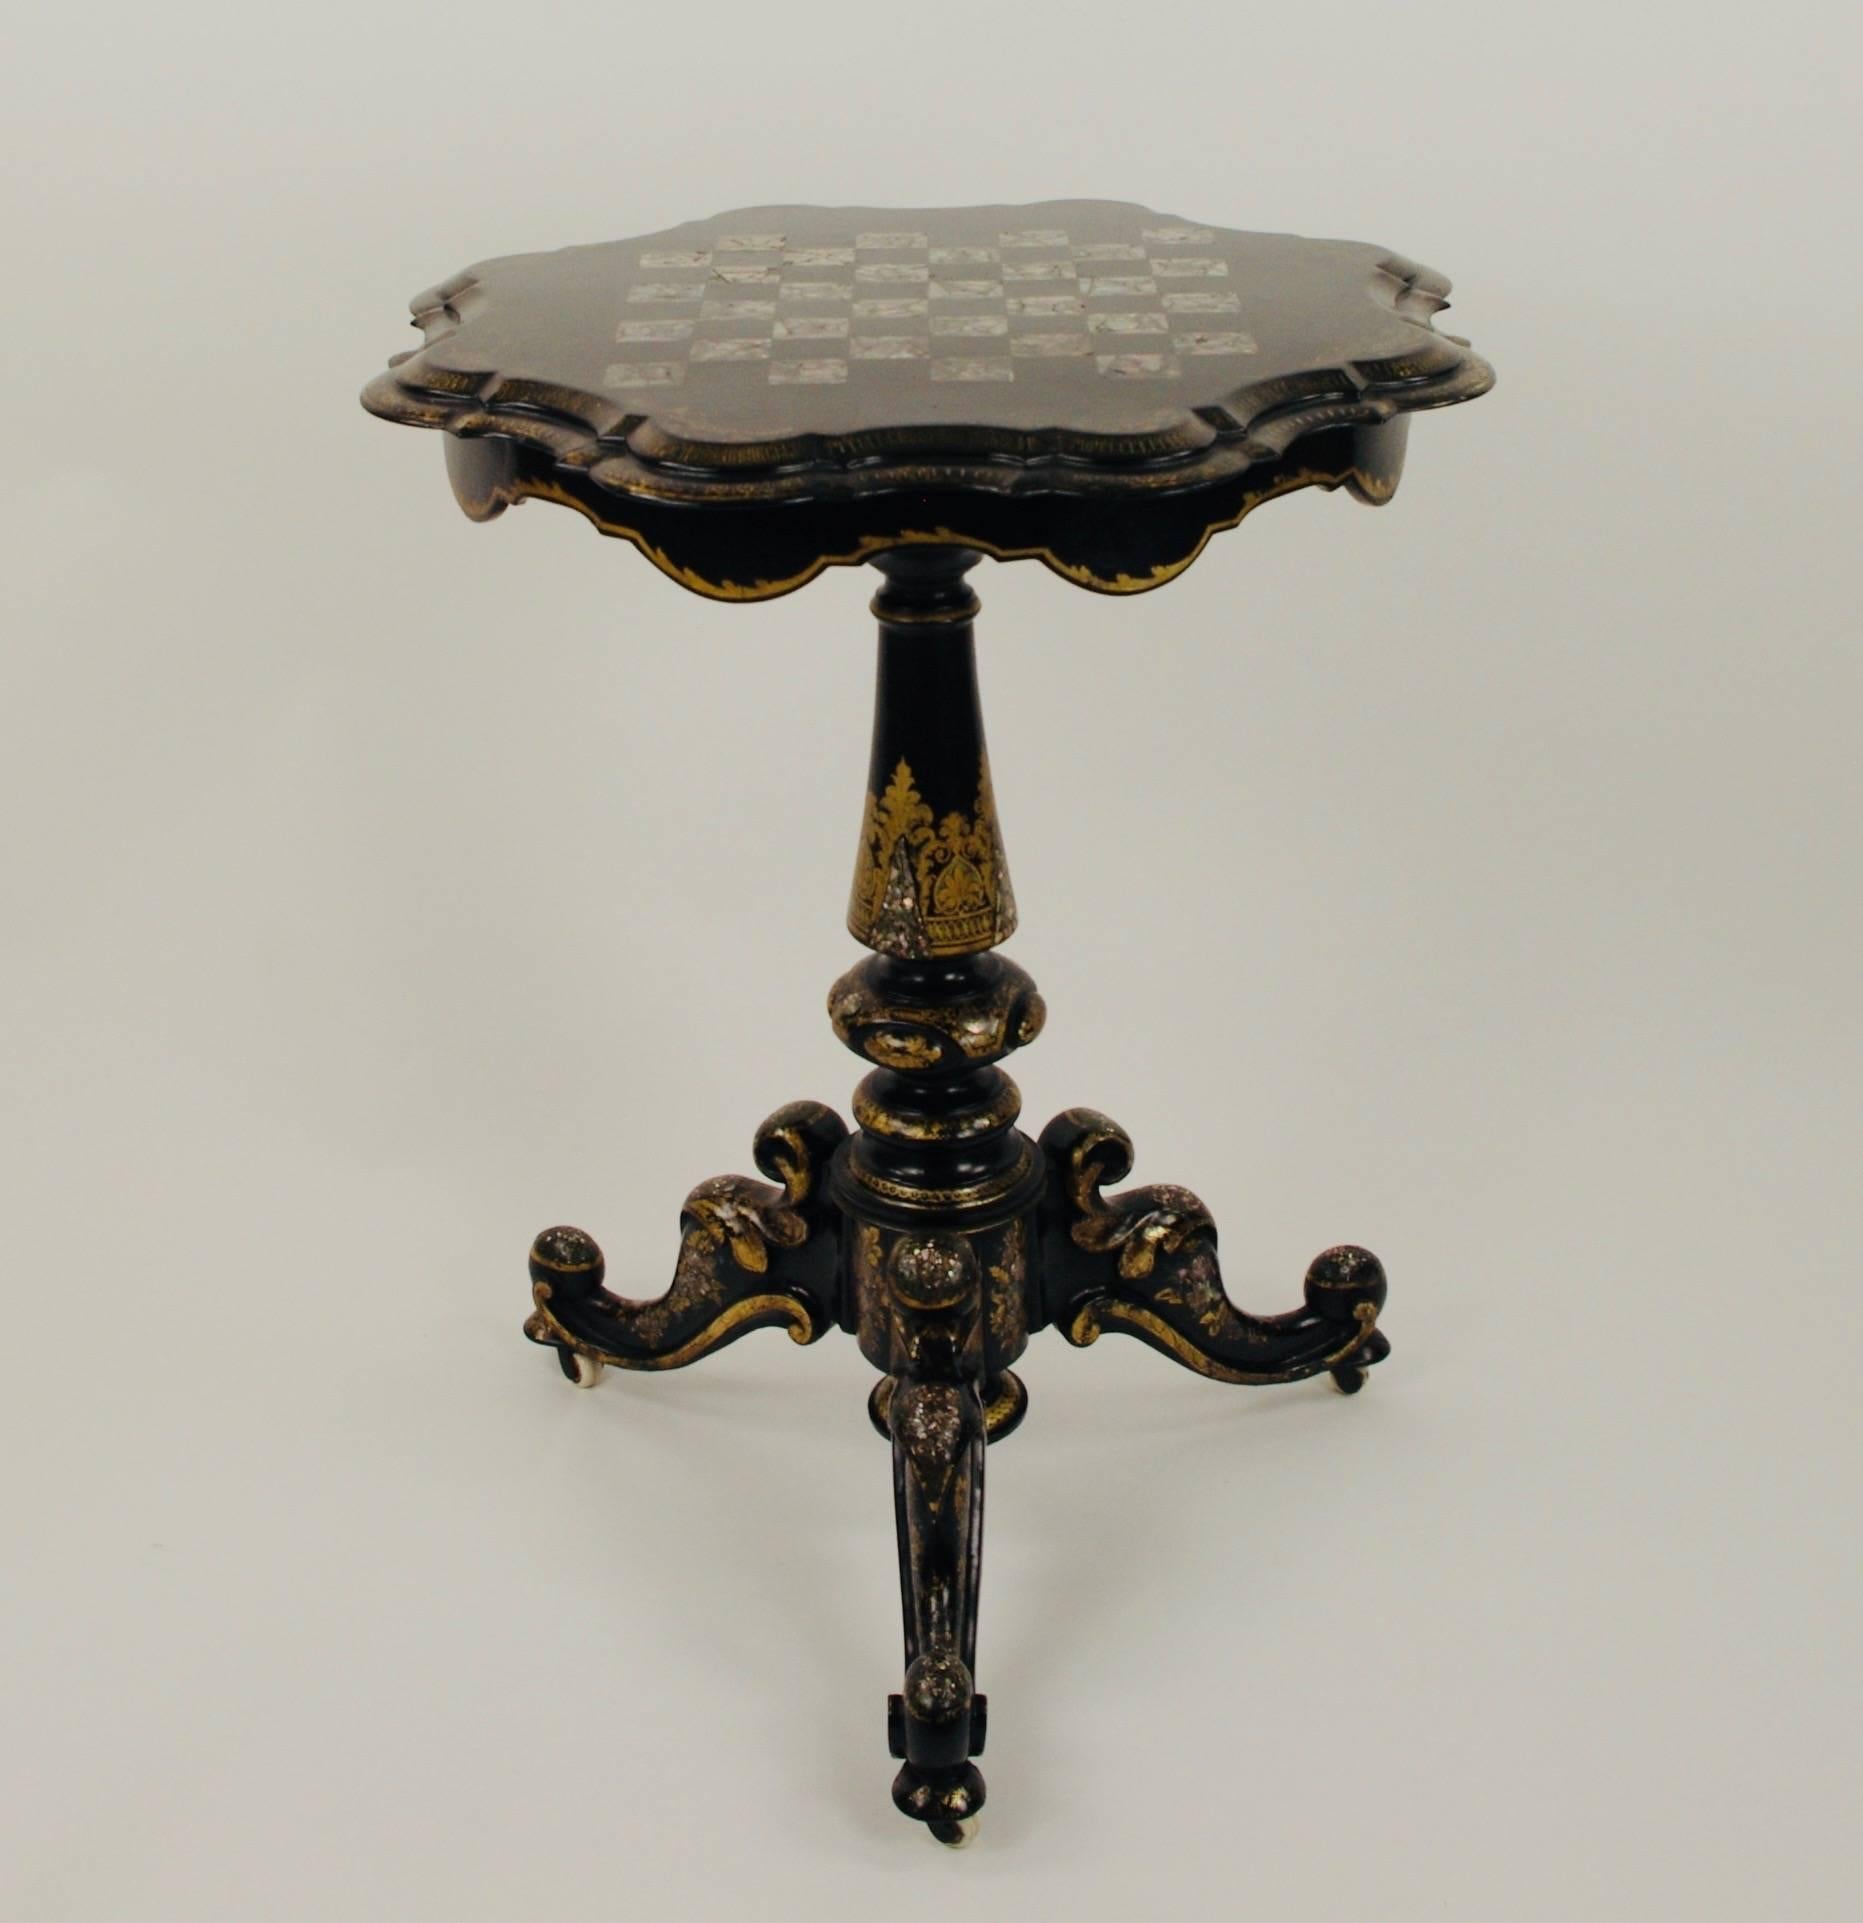 Japanned gilt lacquered tilt top games table, the cartouche shaped top inlaid with a mother-of-pearl chequer board on tripod scroll base.

This item is on show in Berkshire UK